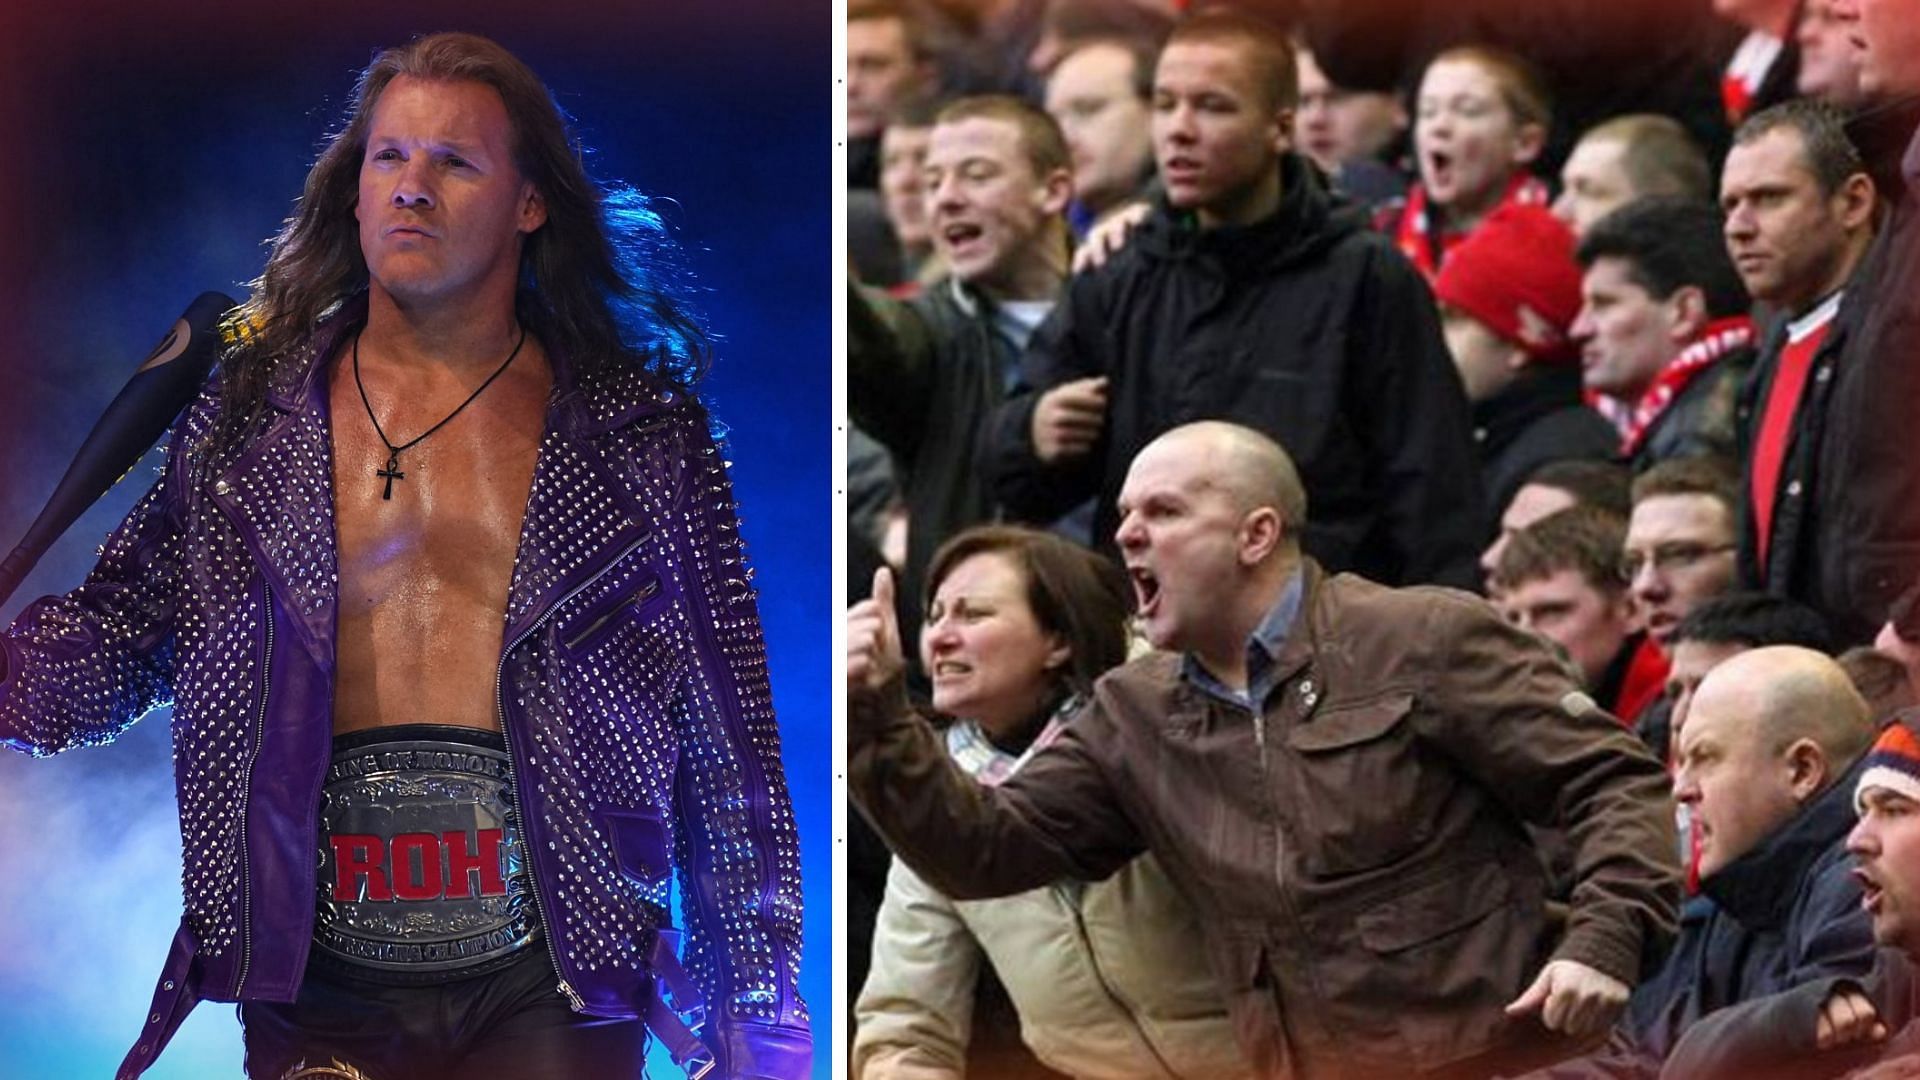 Former WWE Superstar Chris Jericho sure did get a lot of heat as a heel in the promotion.